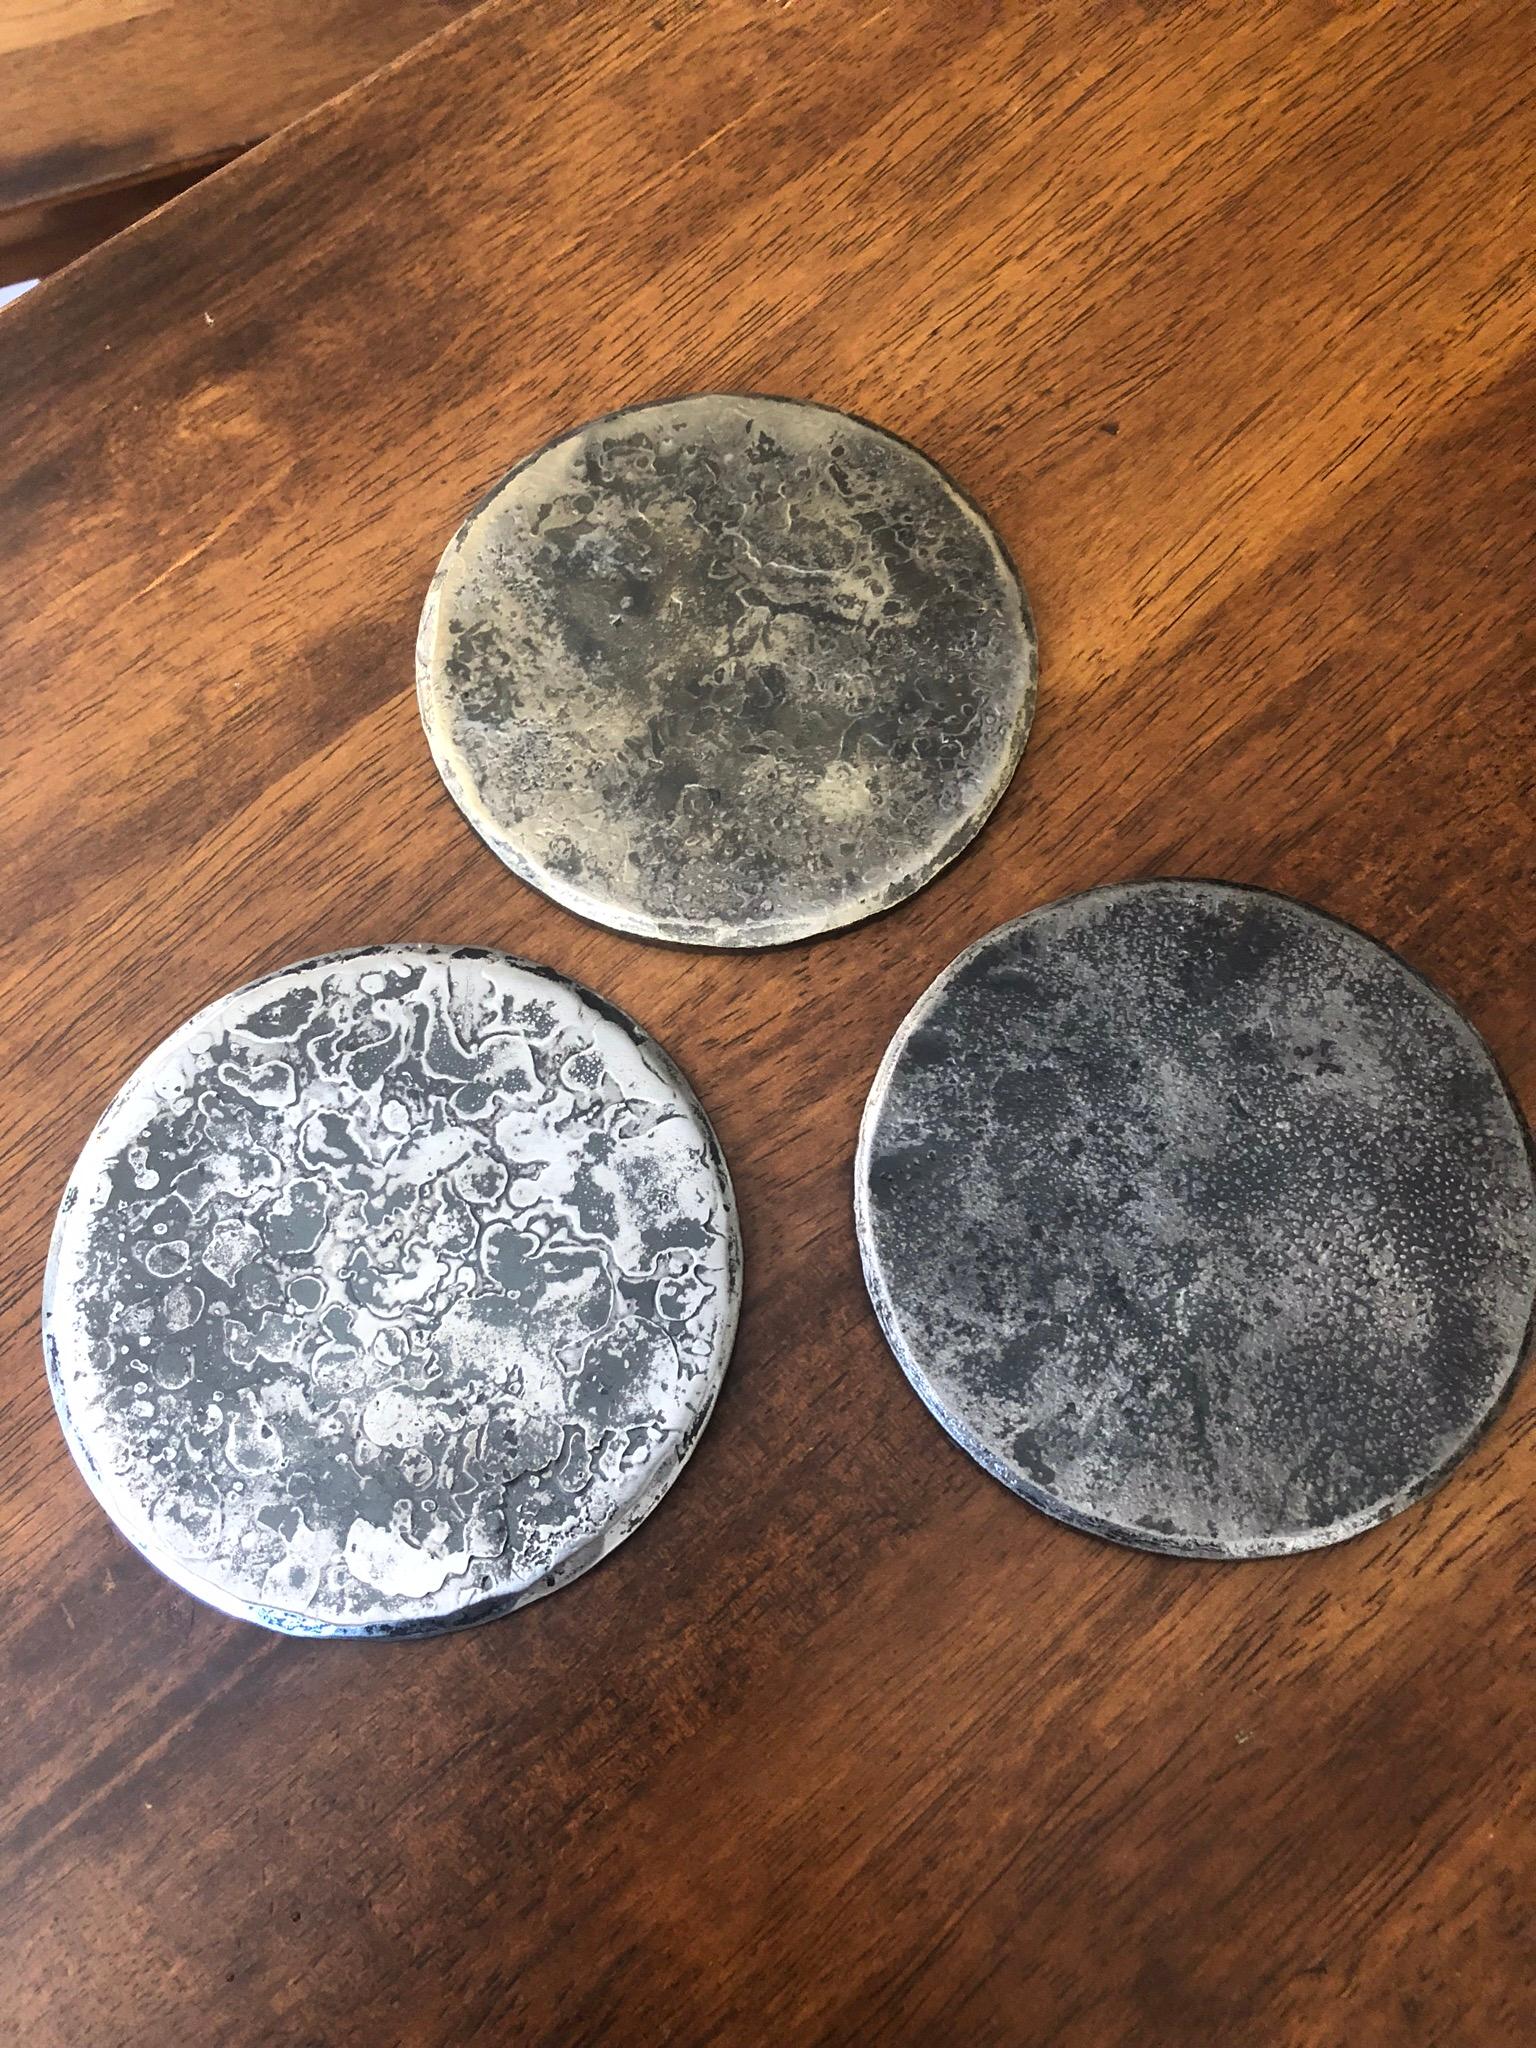 A beautifully handcrafted, round, steel coaster, with a subtle golden shine that deepen the steel base. The rich gold tone is achieved through the use of a brass wire brush. These substantial, quarter inch thick coasters have hammered, beveled